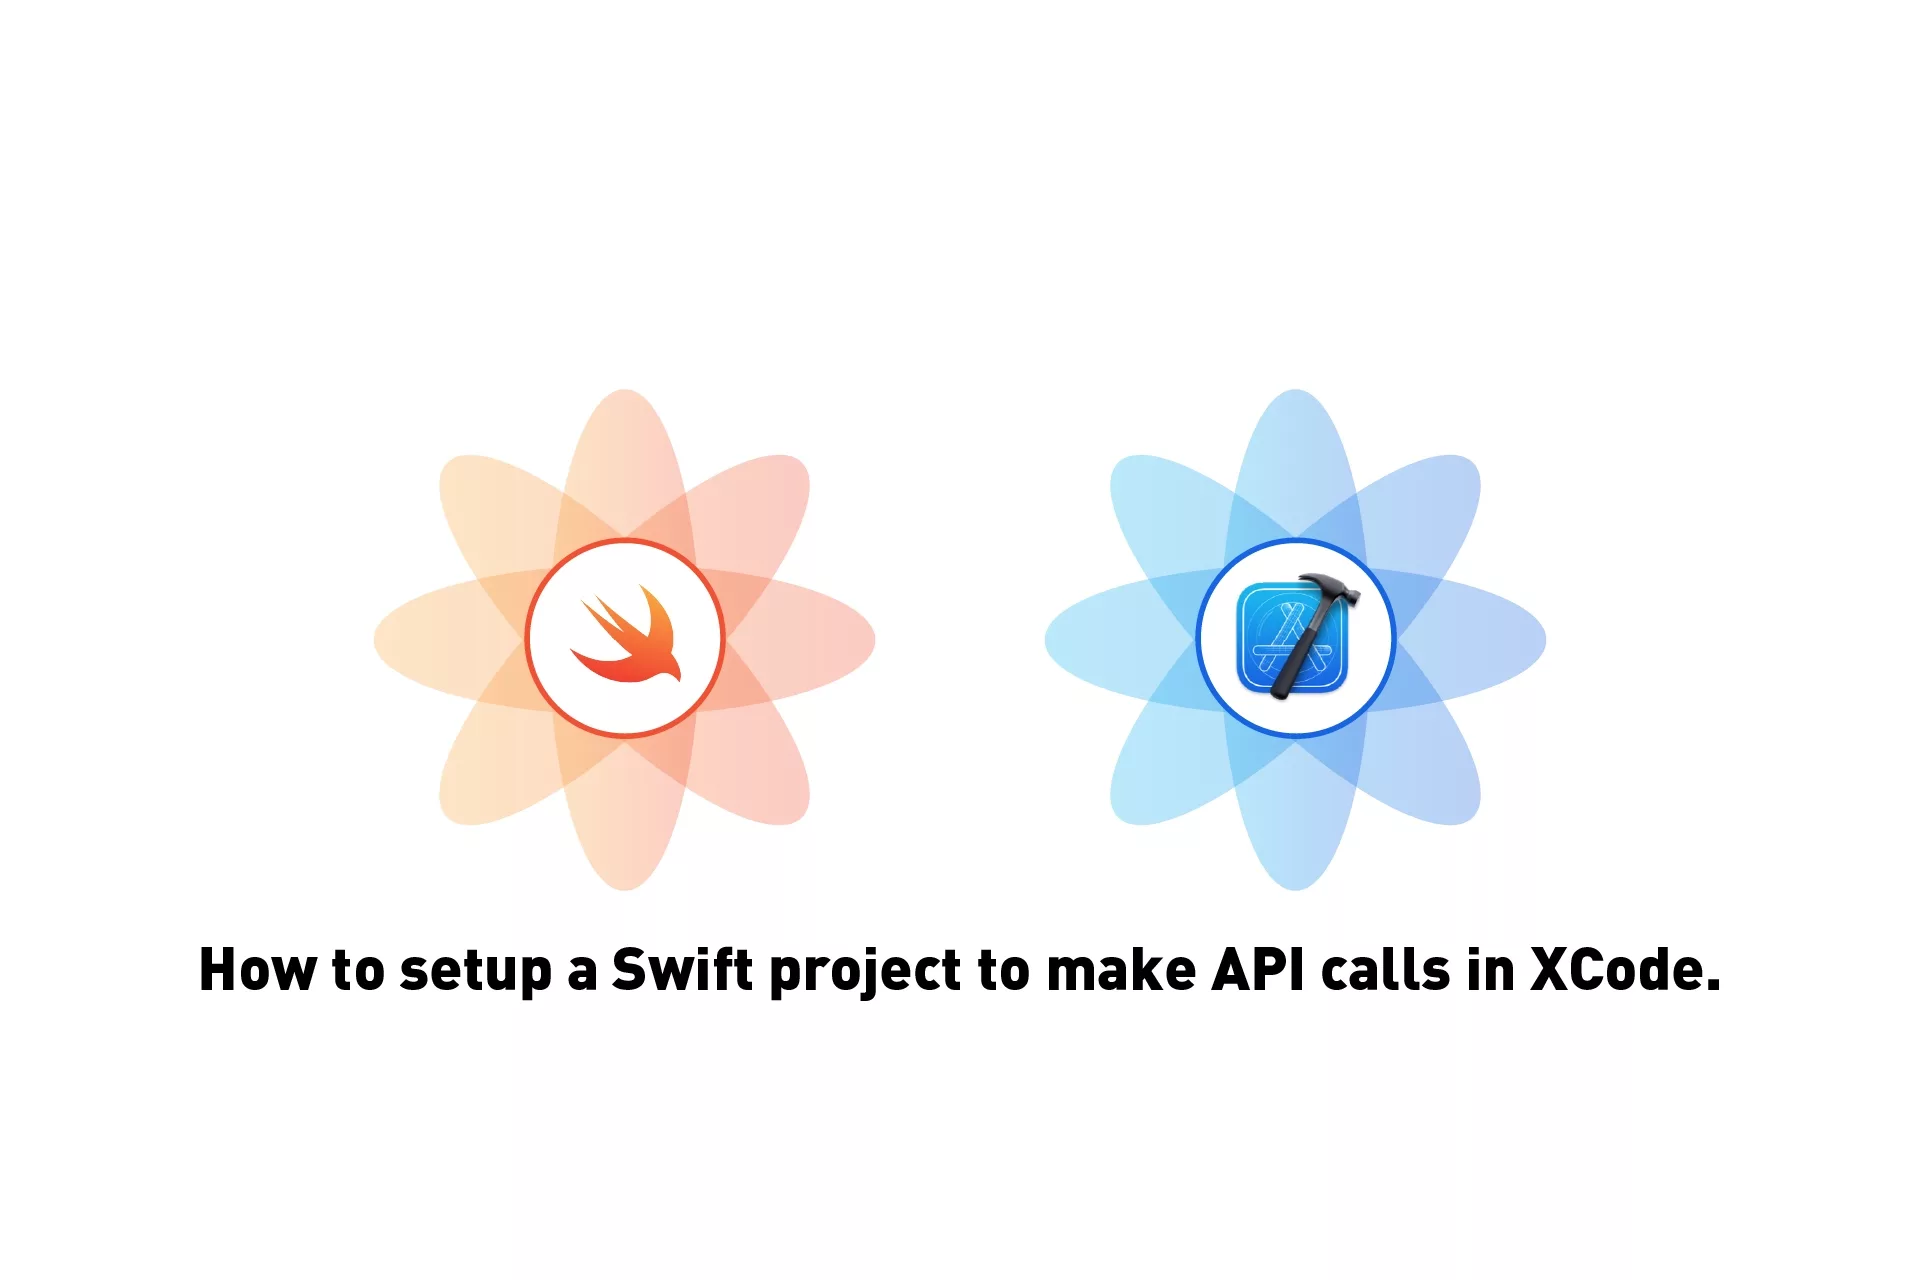 A flower that represents Swift next to a flower that represents XCode. Beneath it sits the text that states 'How to setup a Swift project to make API calls in XCode'.